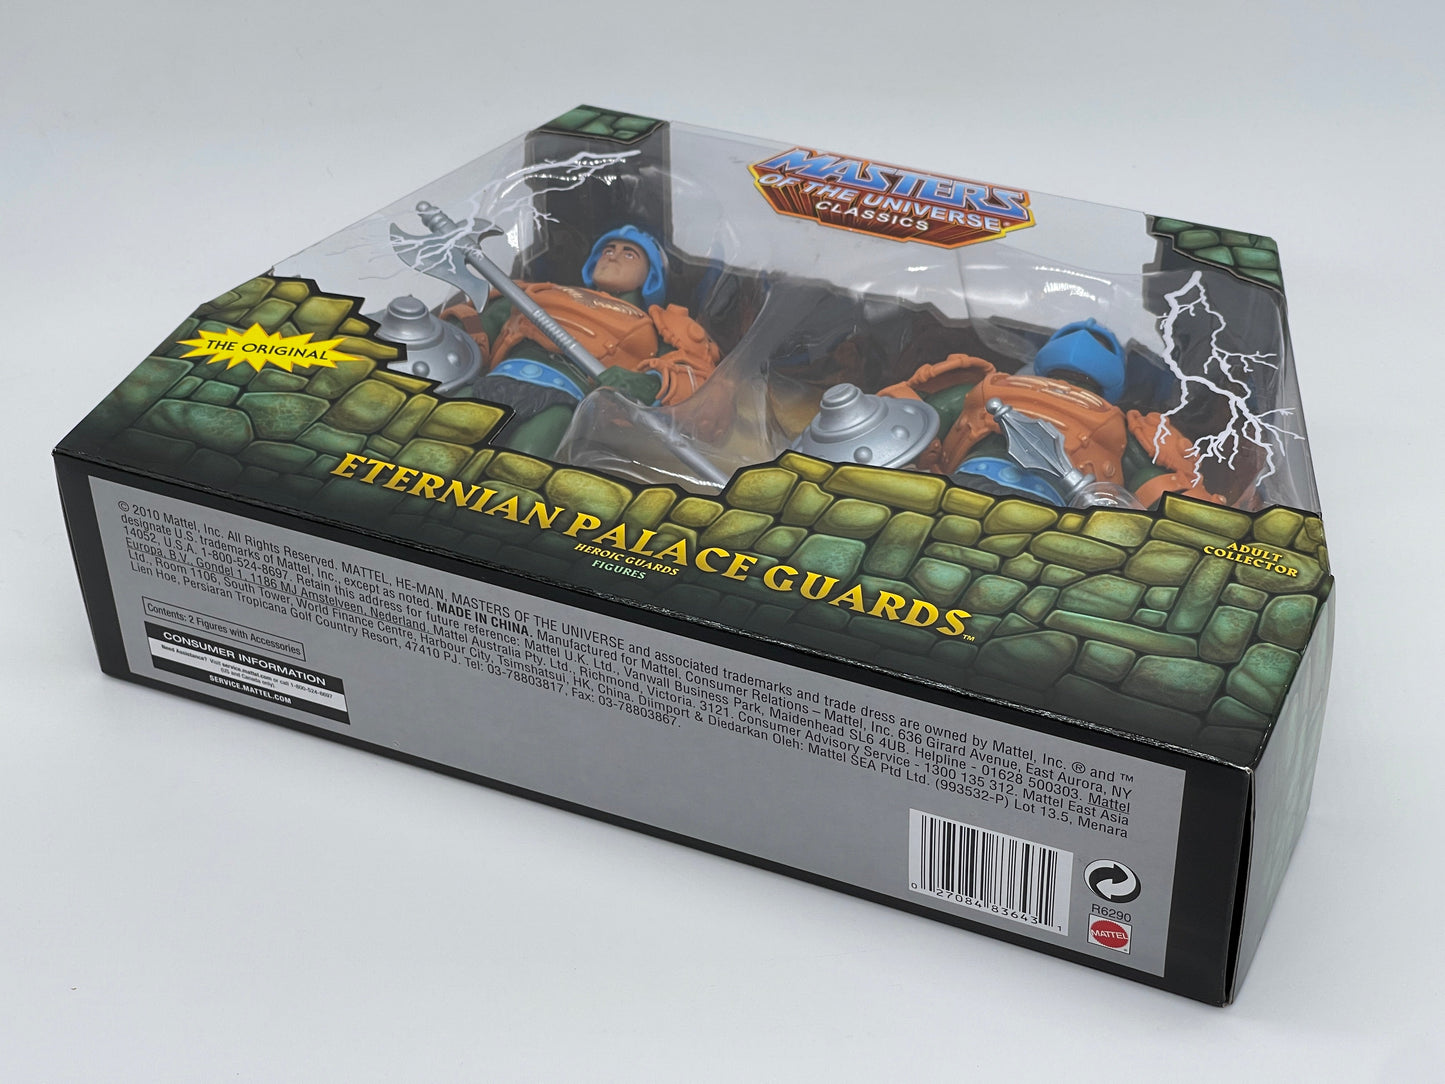 Masters of the Universe Classics "Eternian Palace Guards" mit Mailerbox sealed (2010)